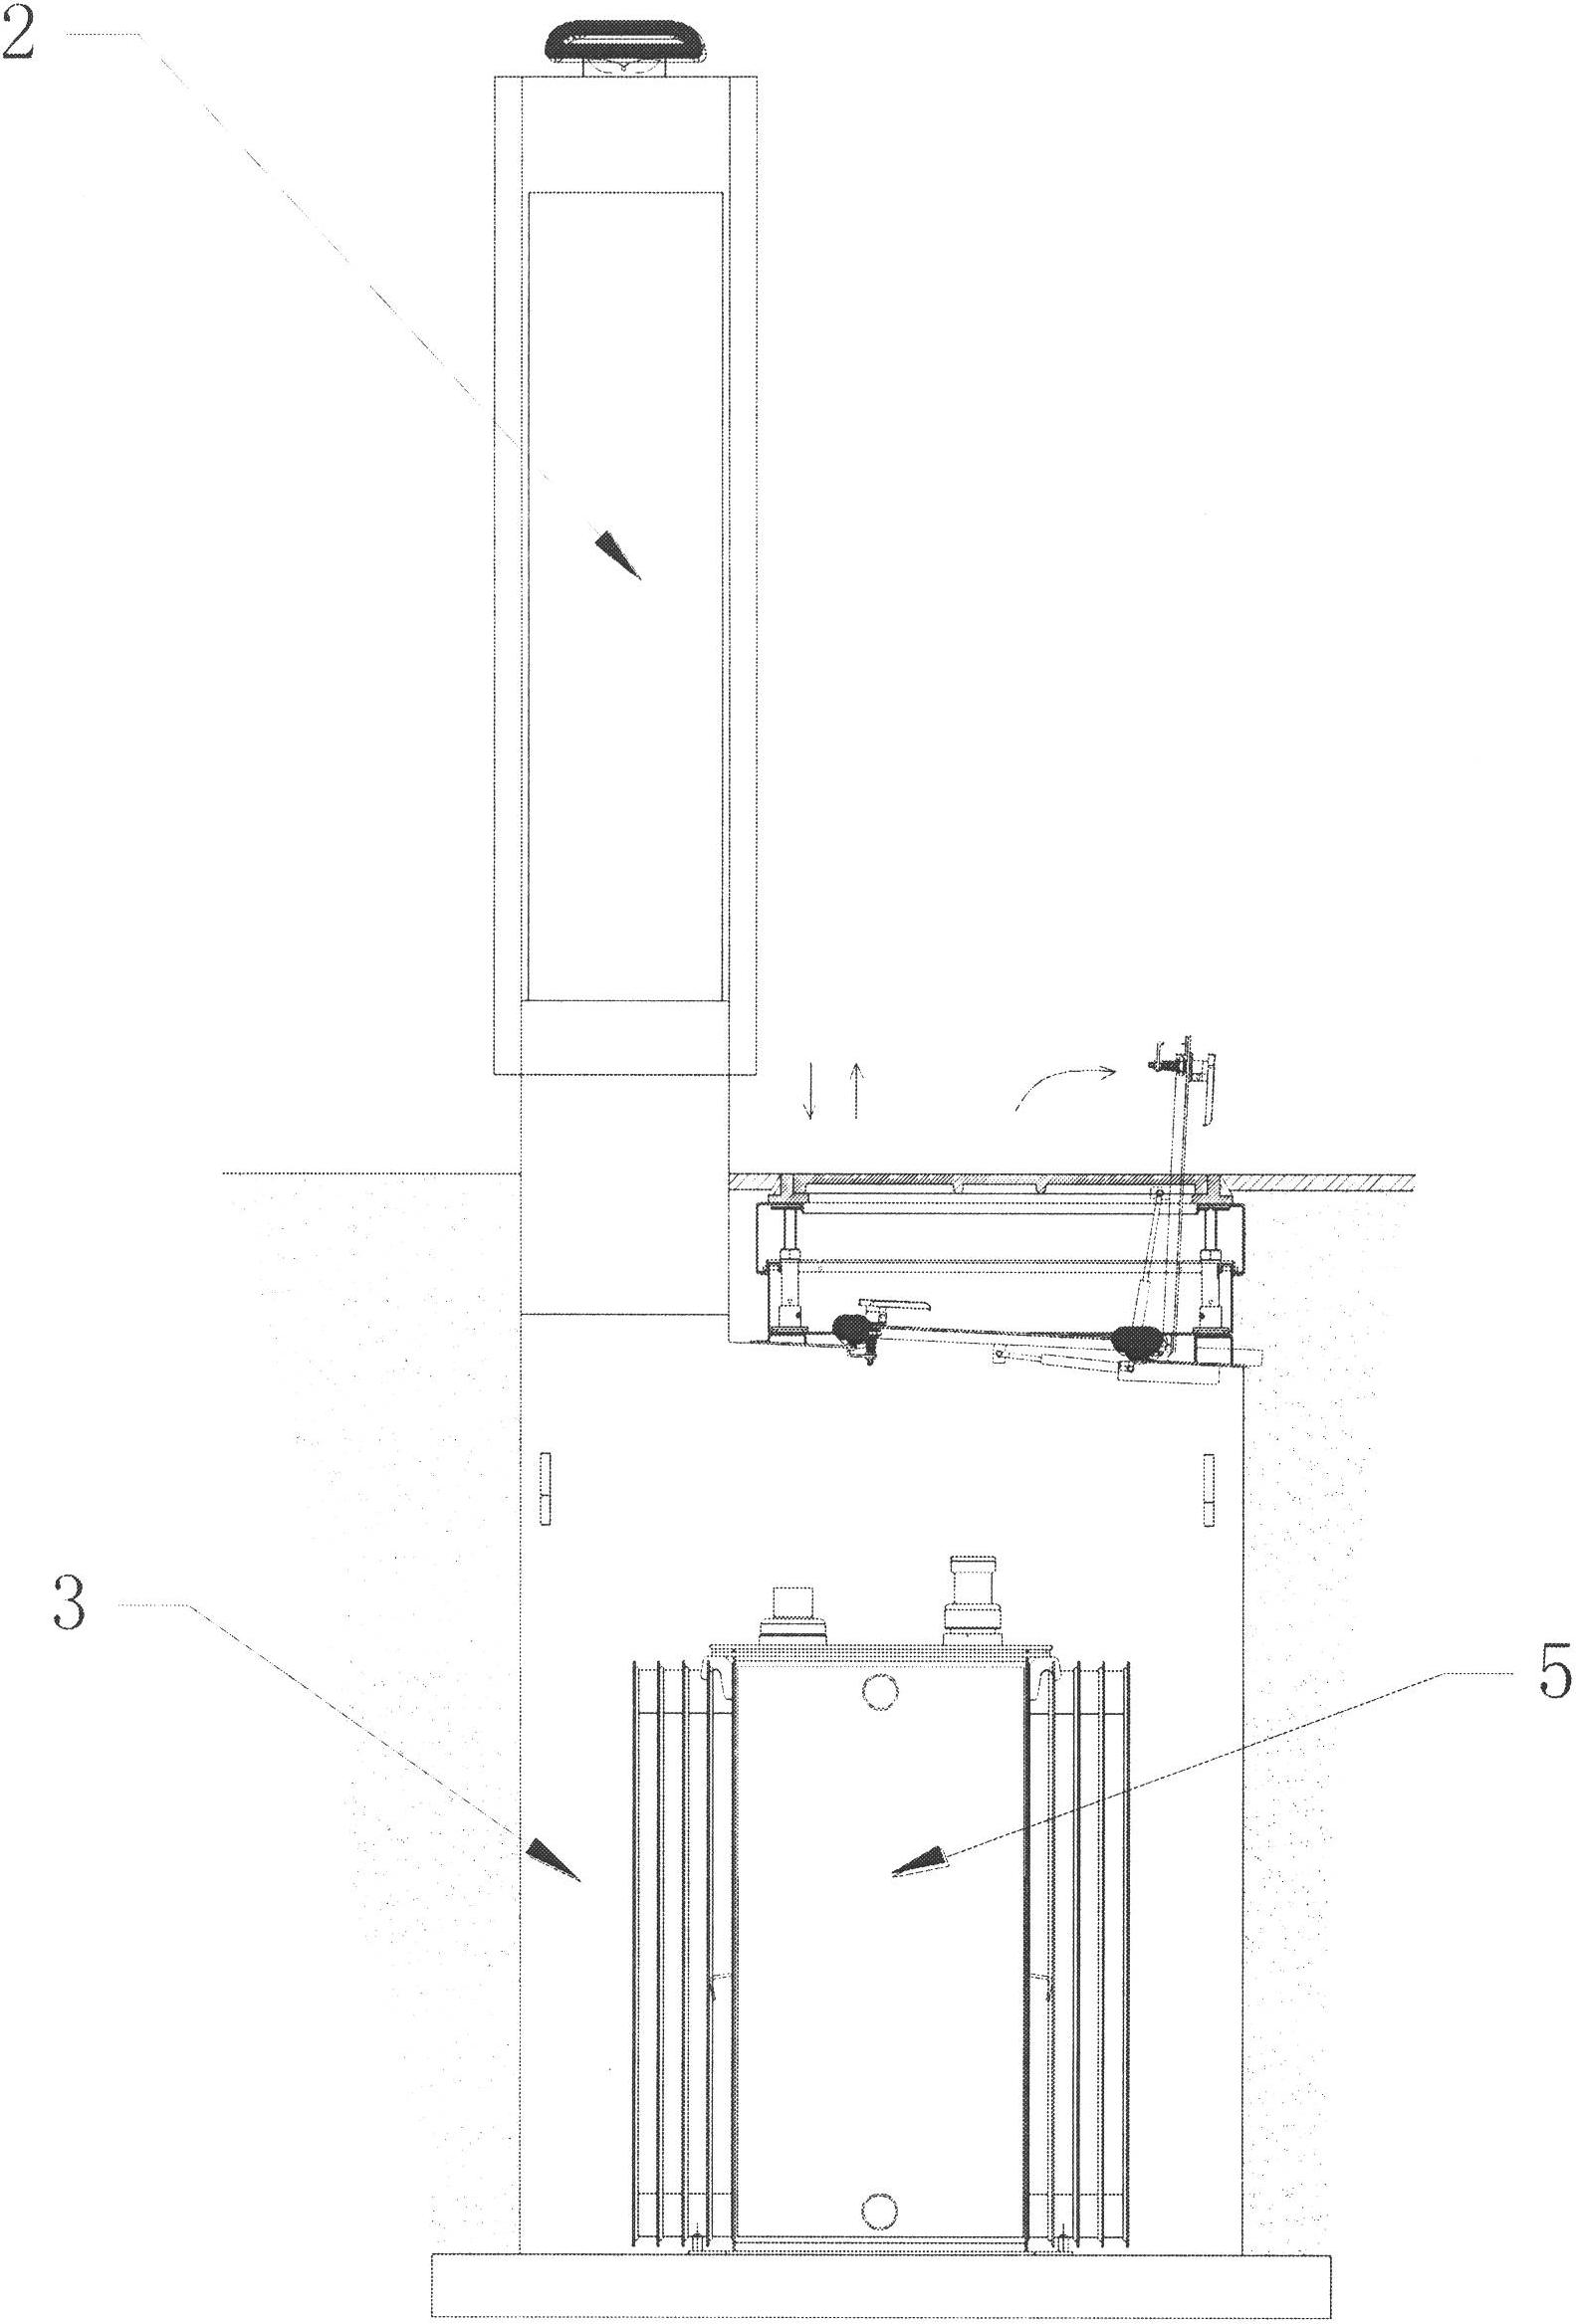 Lower box body structure of half-buried box-type substation